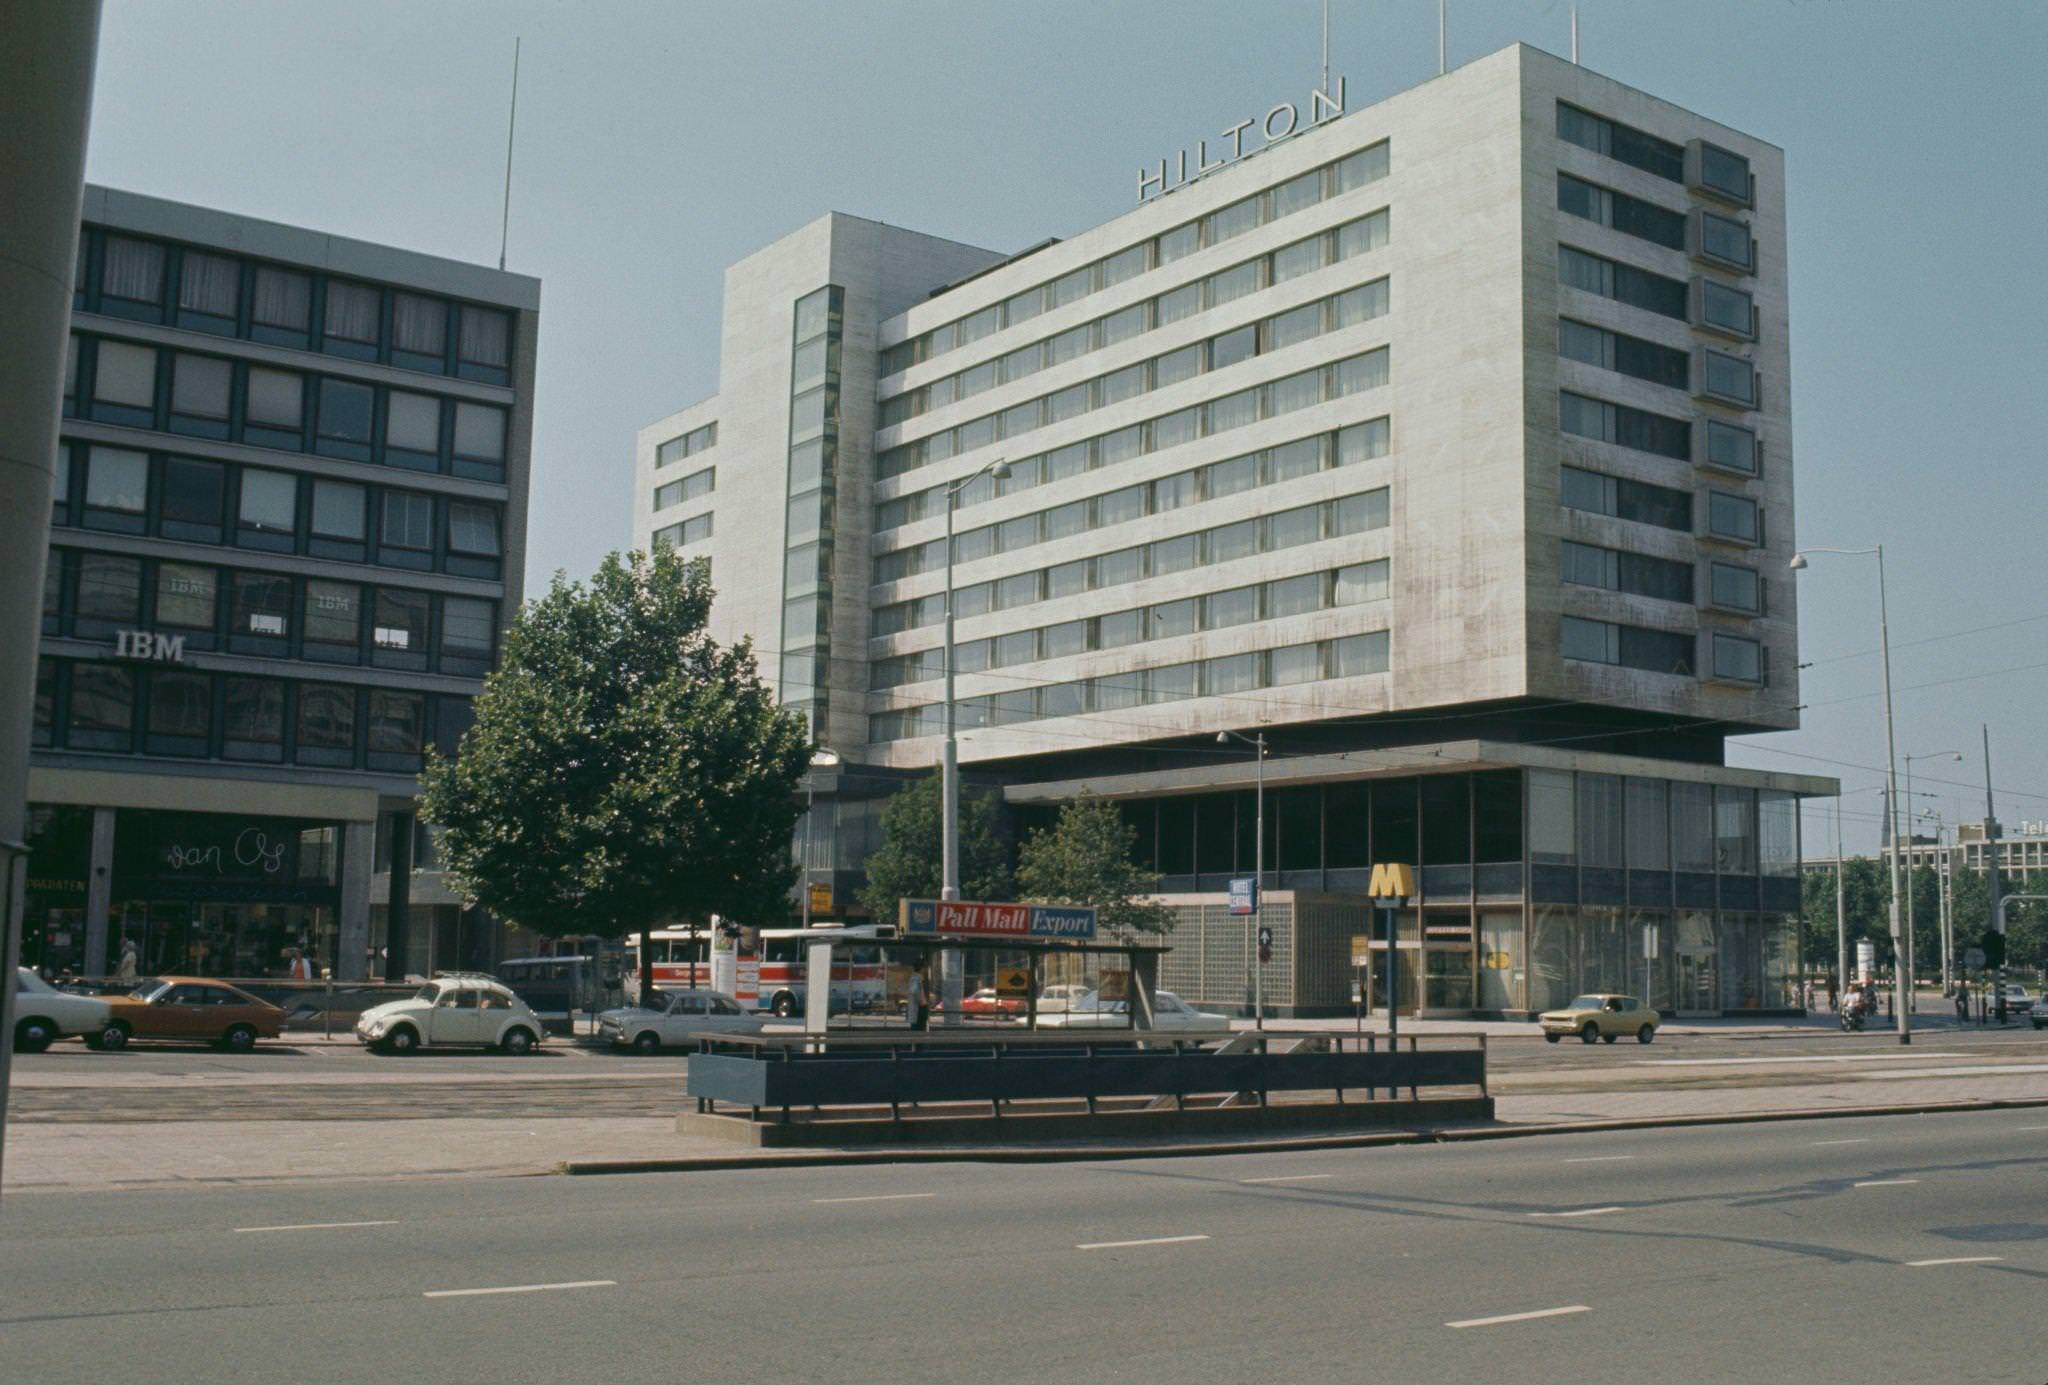 The Hilton Hotel on Hofplein in the center of Rotterdam, the Netherlands in September 1973. The hotel, located close to Centraal station, was opened by Conrad Hilton in May 1963.